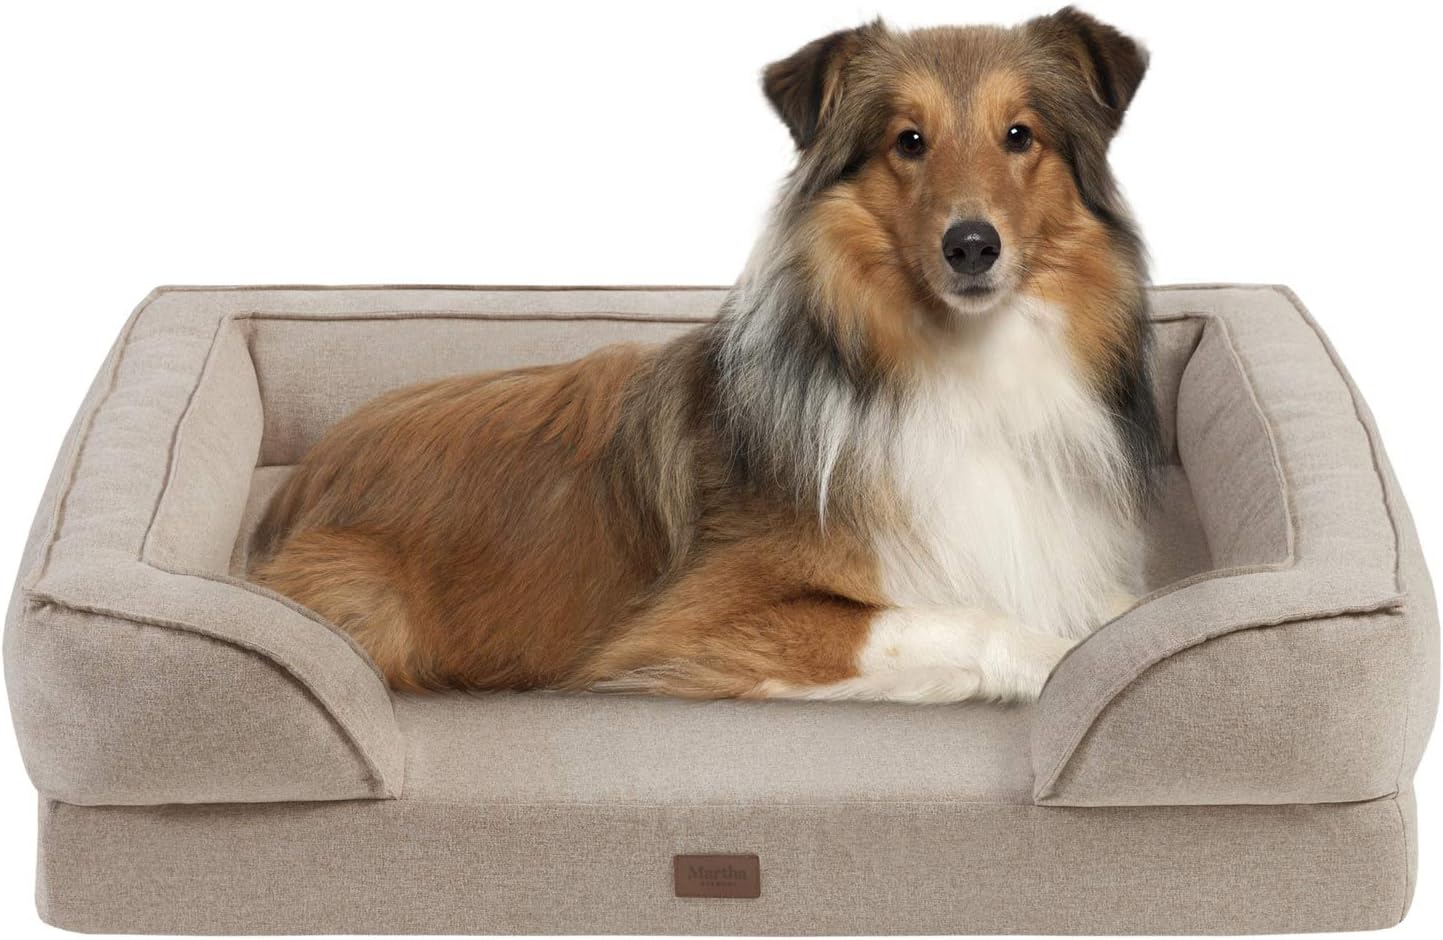 MARTHA STEWART Bella Modern Orthopedic Memory Foam Dog Lounge Sofa, Soft Cushion, Machine Washable Removable Cover, Comfy Bolster Pet Beds, Plush Filling for Large Kitten, Puppy, Cat, Small Tan